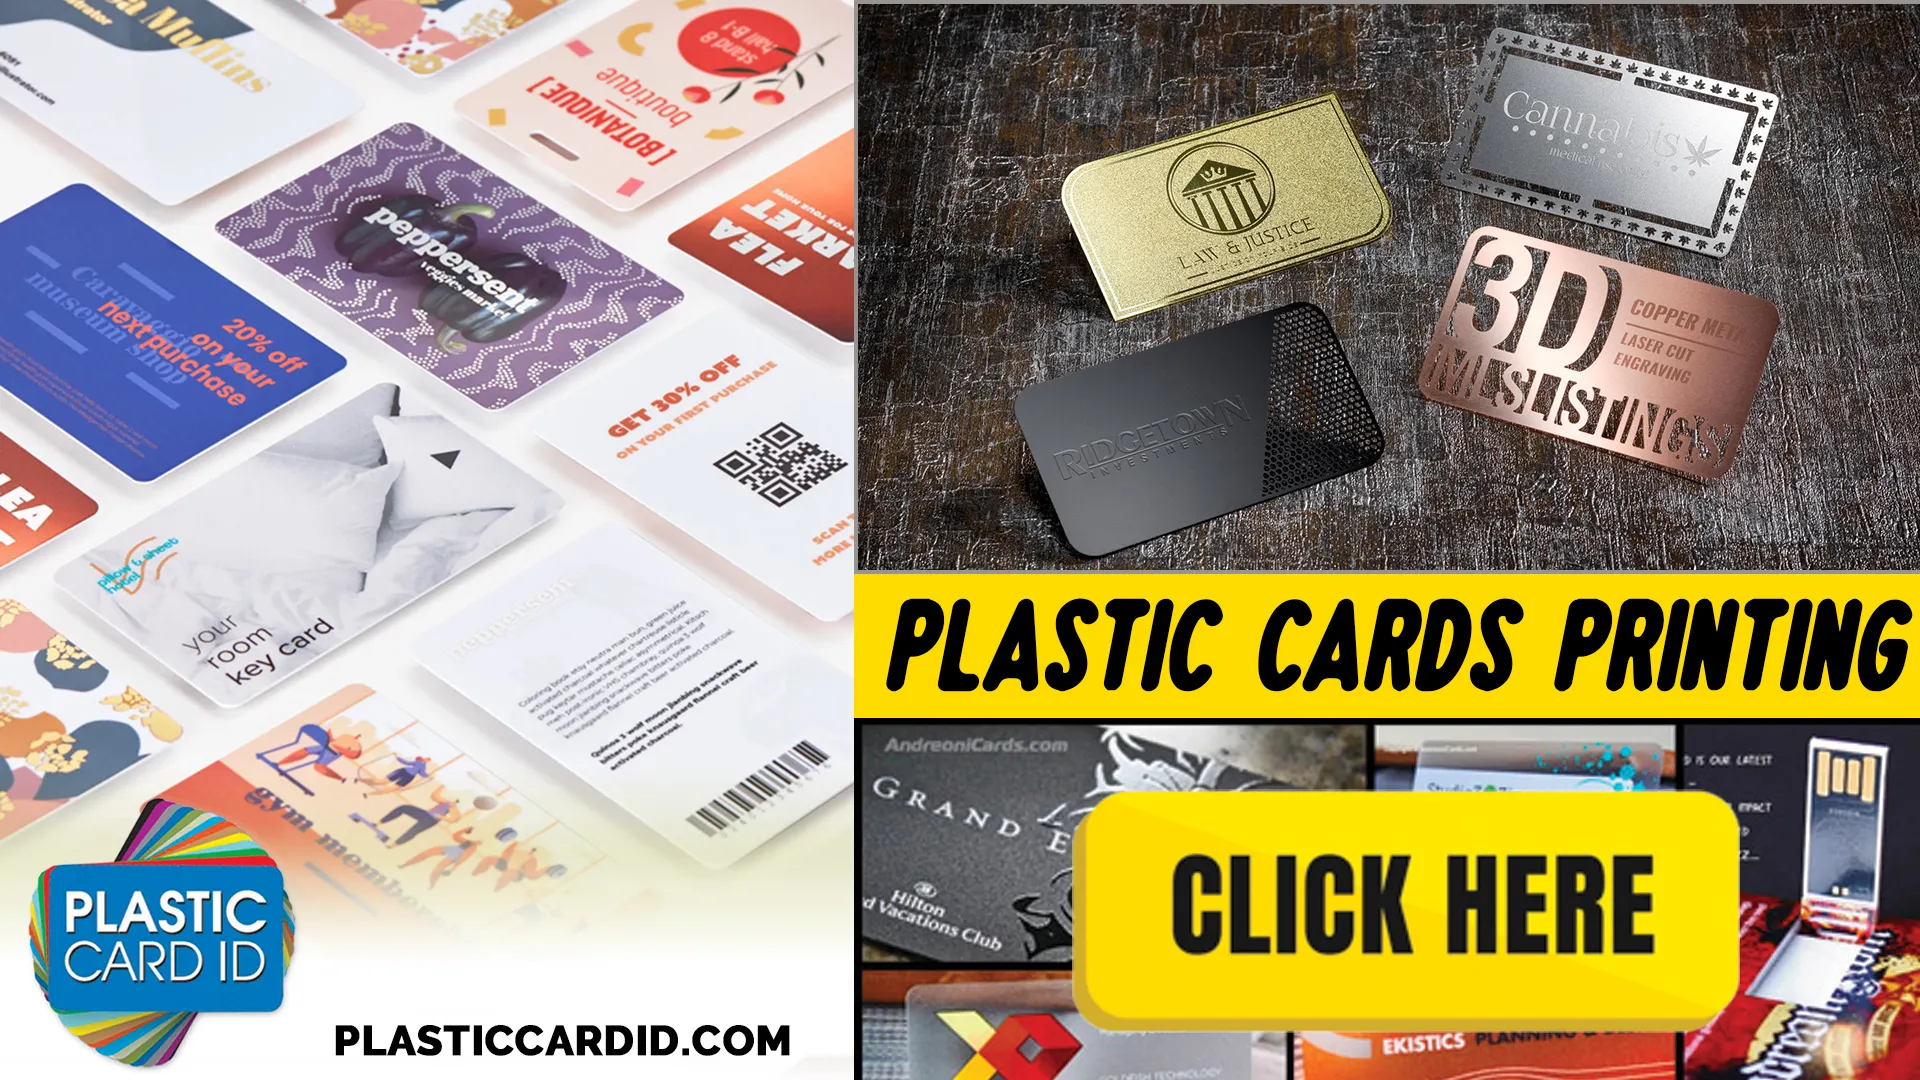 Welcome to Your Premier Provider of Custom Plastic Card Solutions